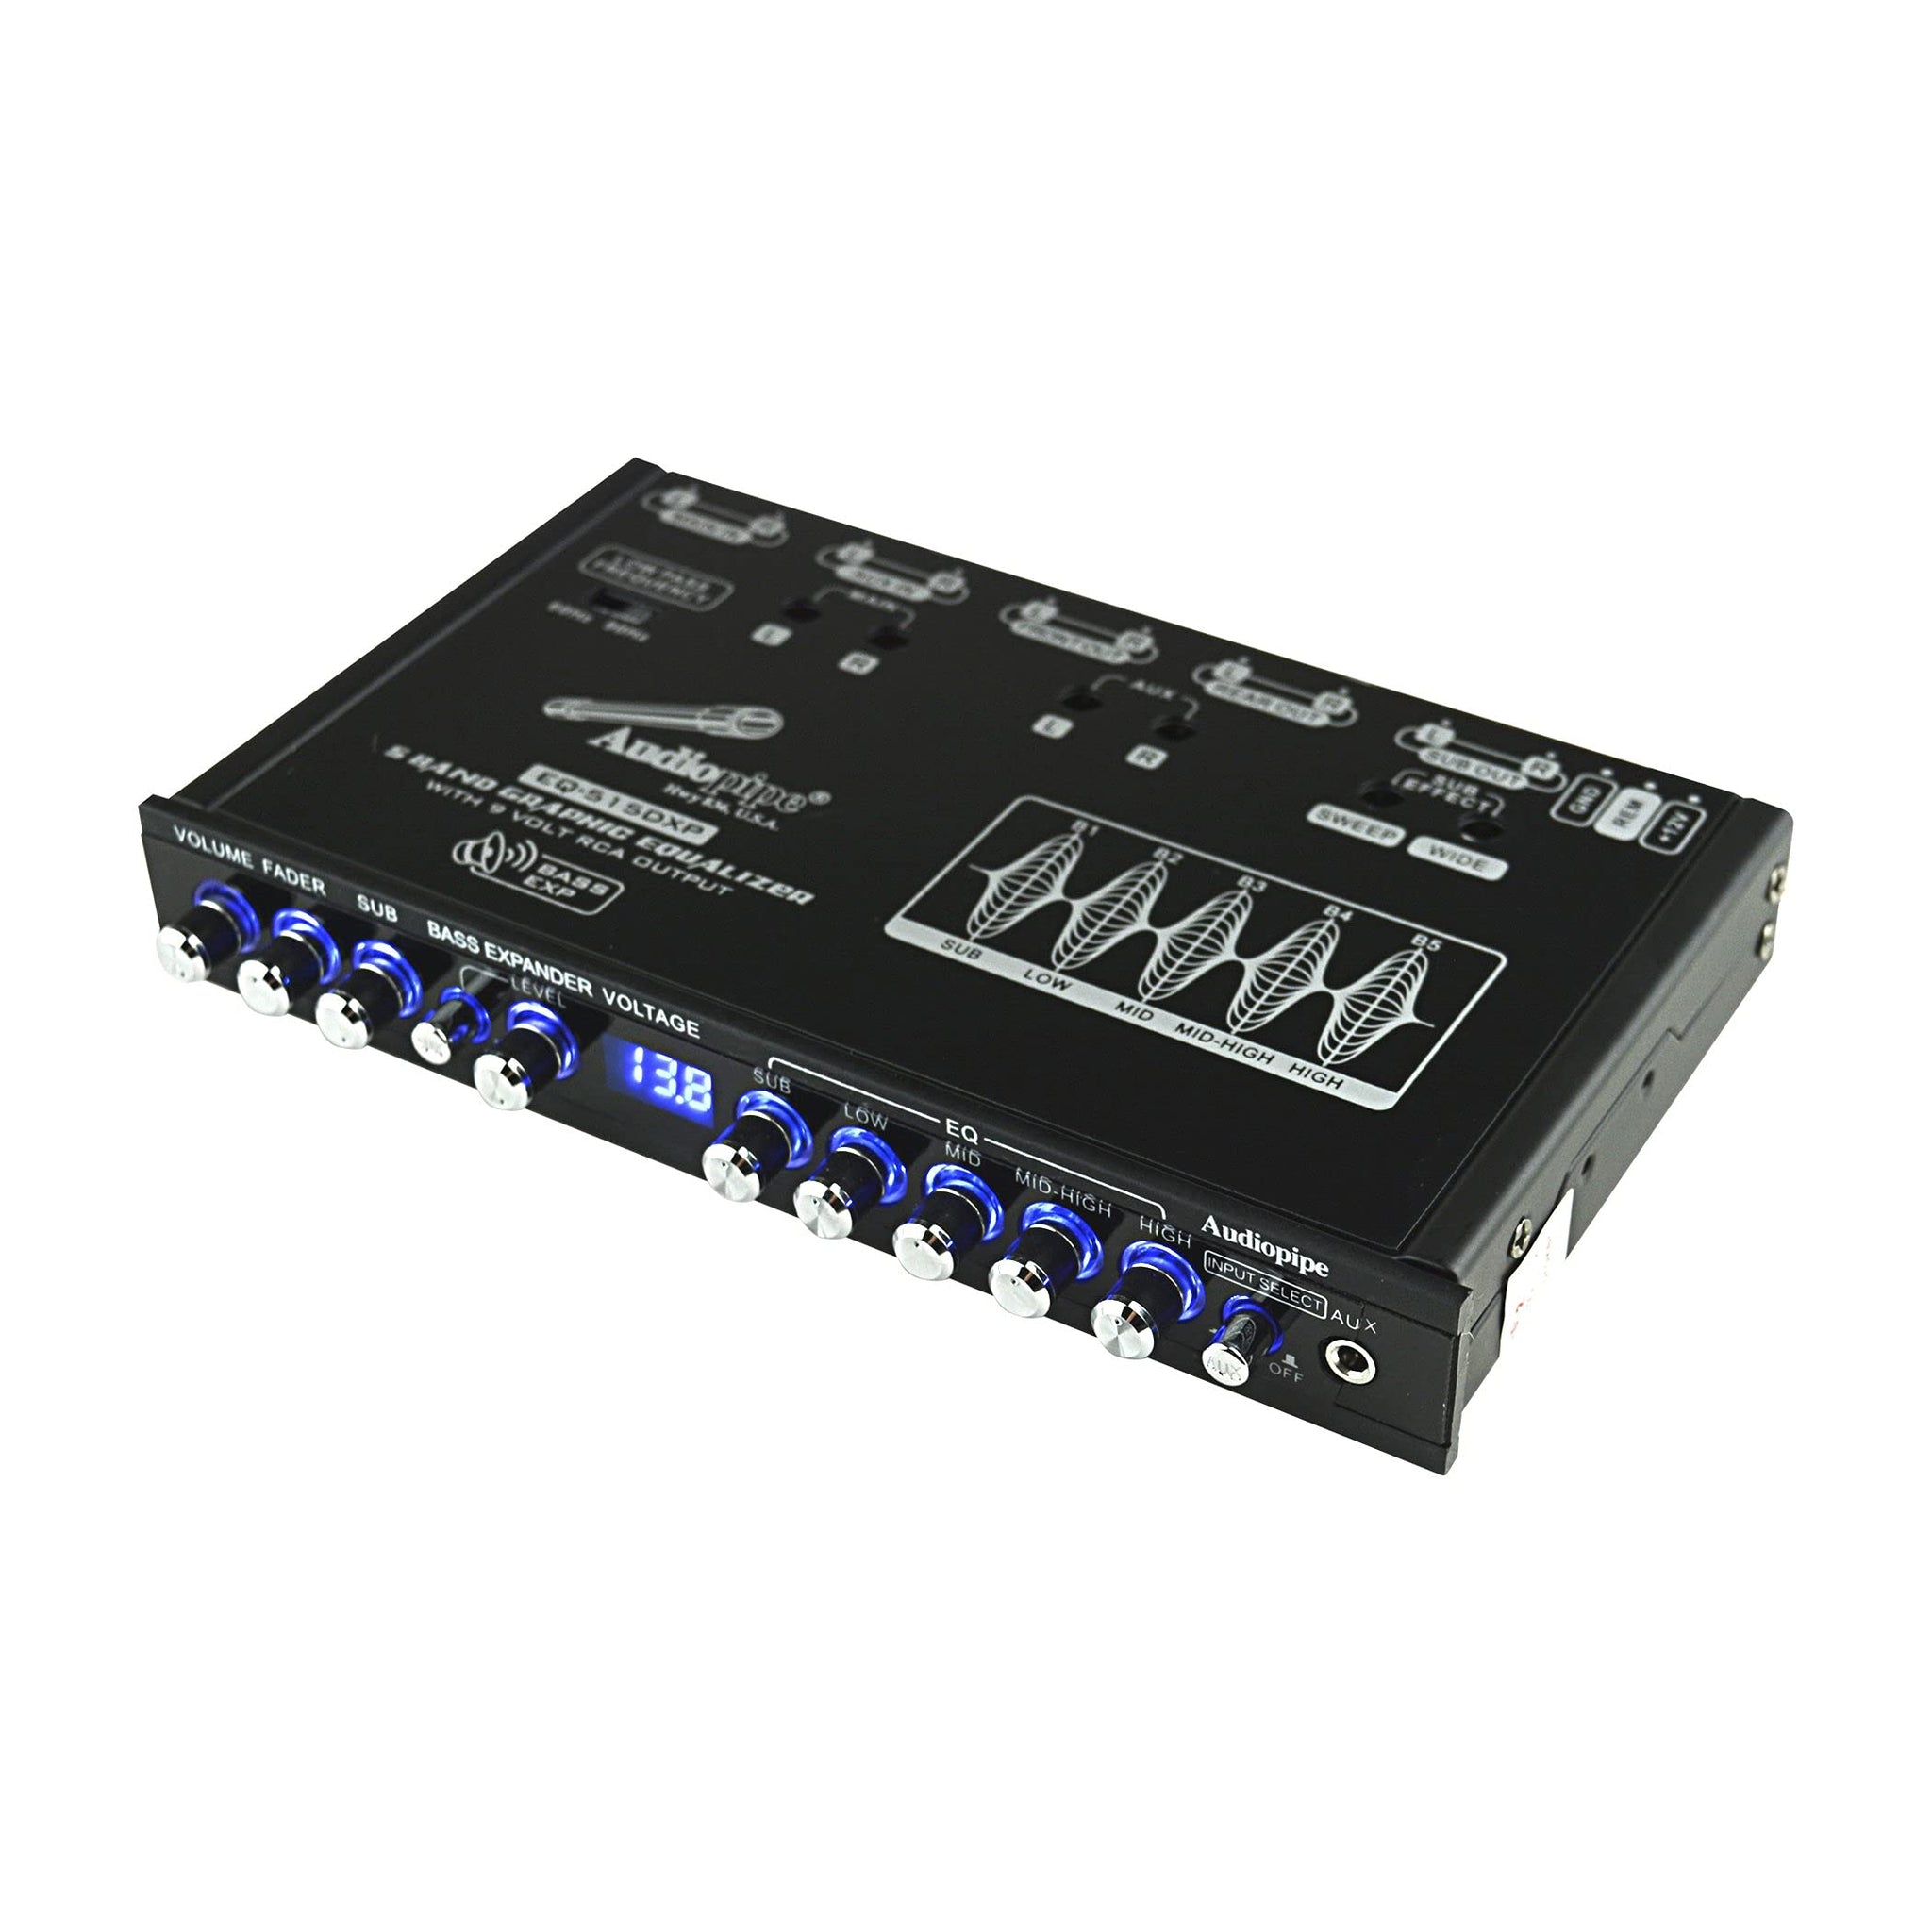 Audiopipe EQ515DXP 5 Band Graphic Equalizer with 9 Volt Line Driver Output